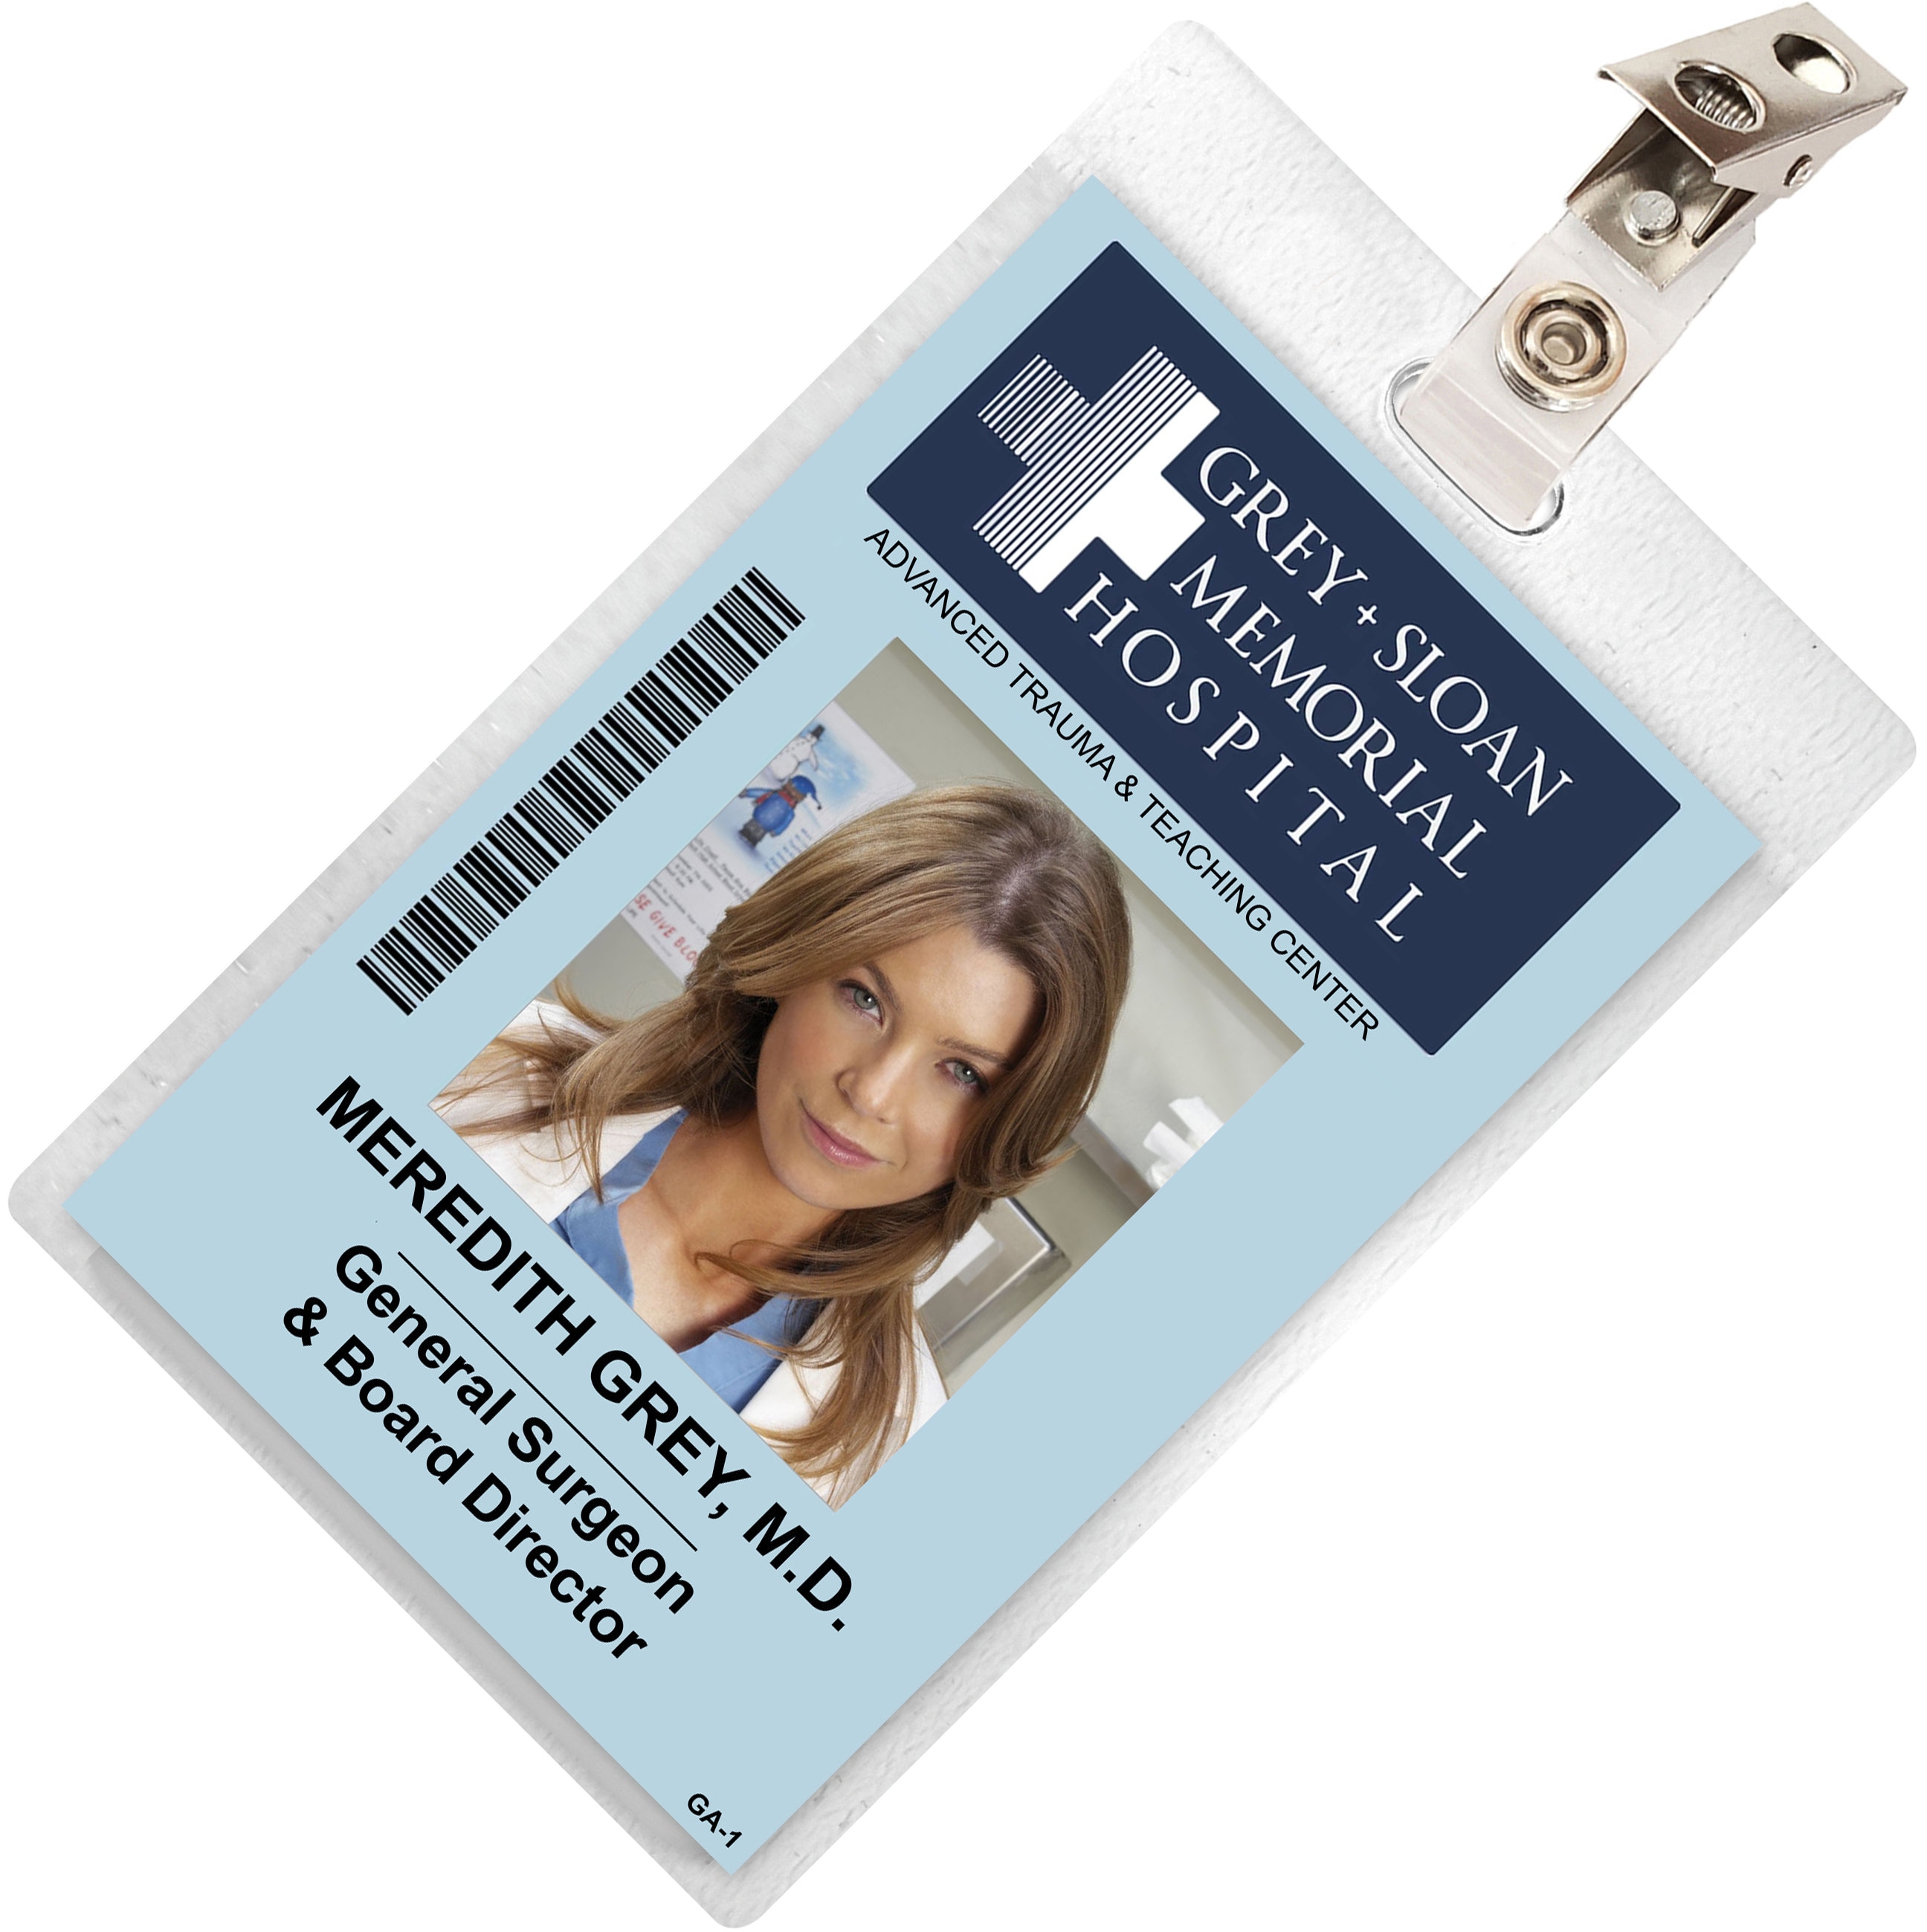 The Office Pam Halpert Beesly Dunder Mifflin ID Badge Card Download Image  Name Tag Cosplay Costume